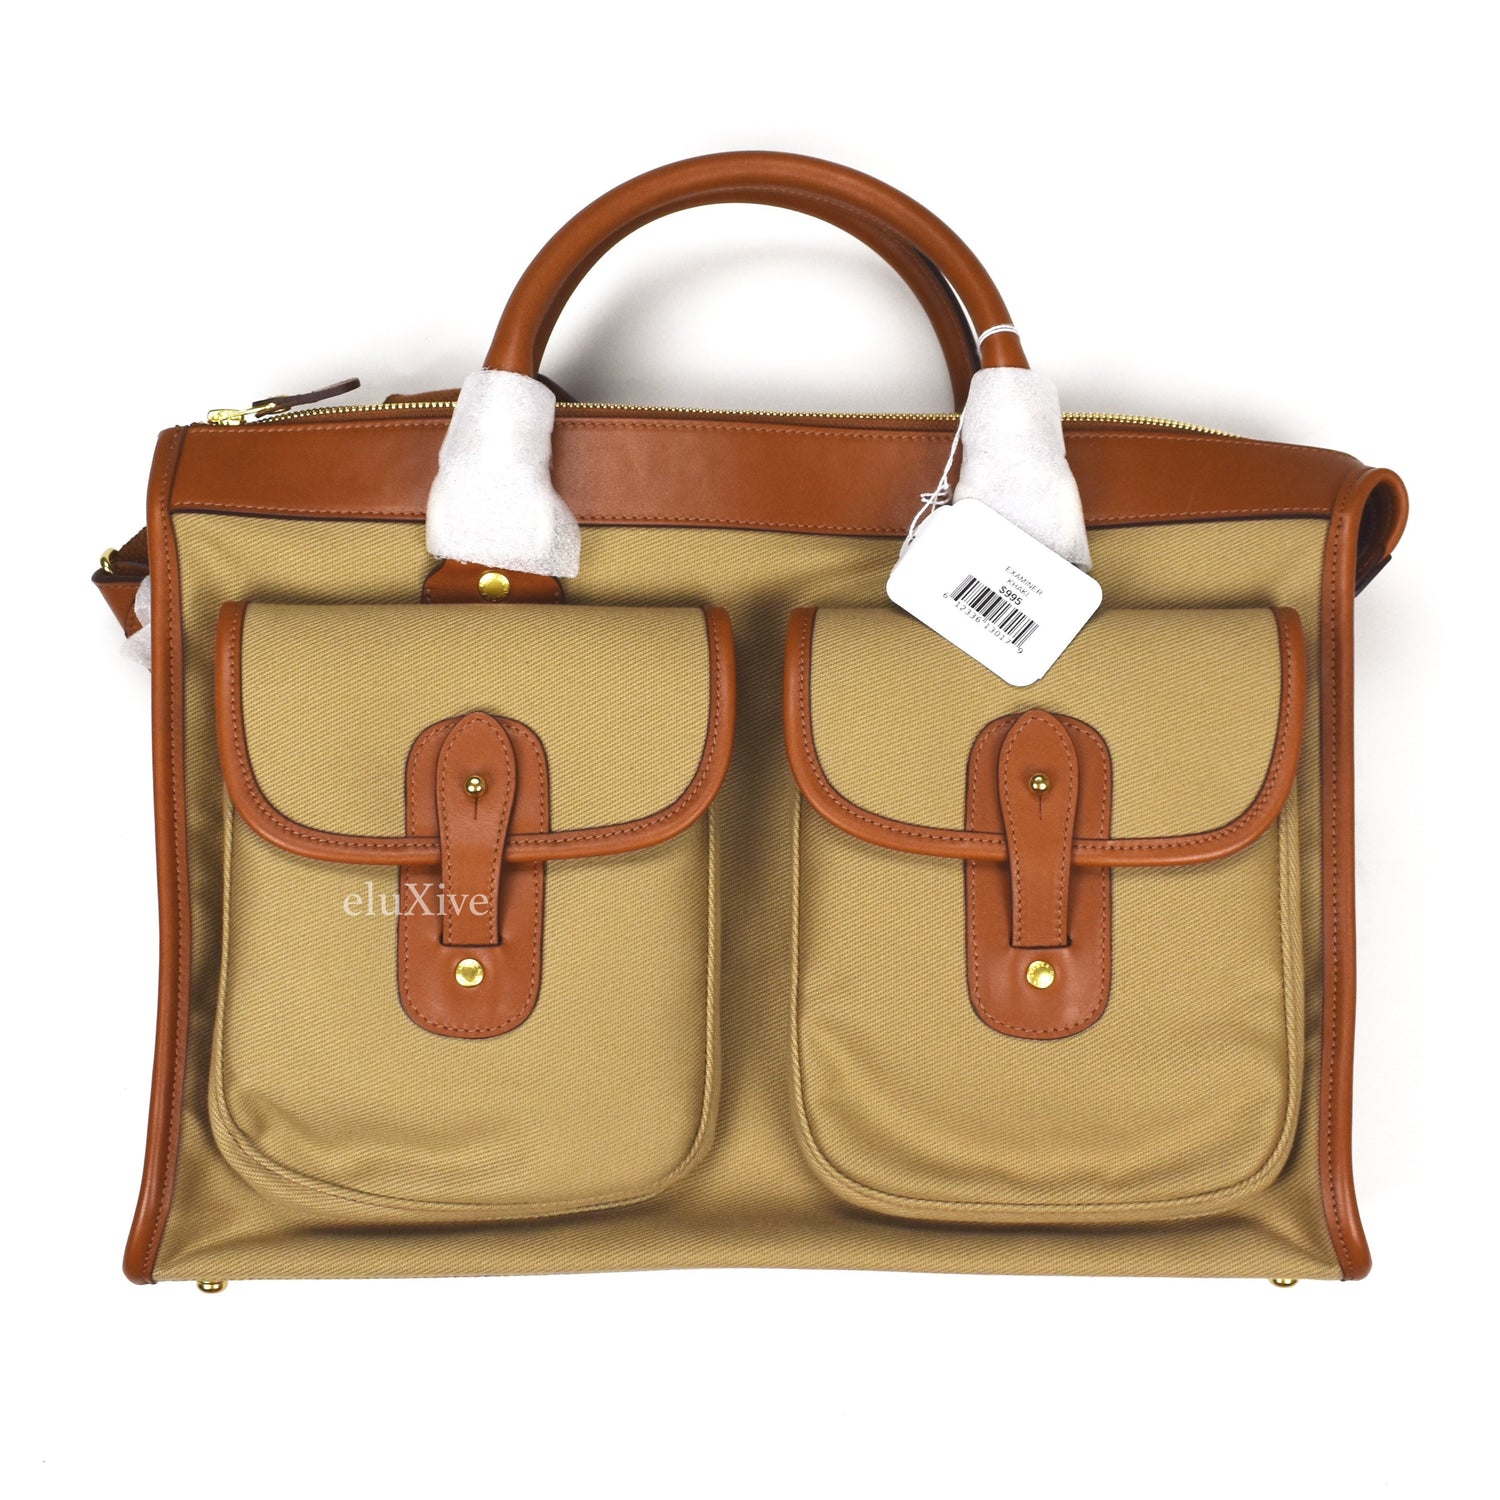 Ghurka  Luxury Leather Goods and Accessories Since 1975